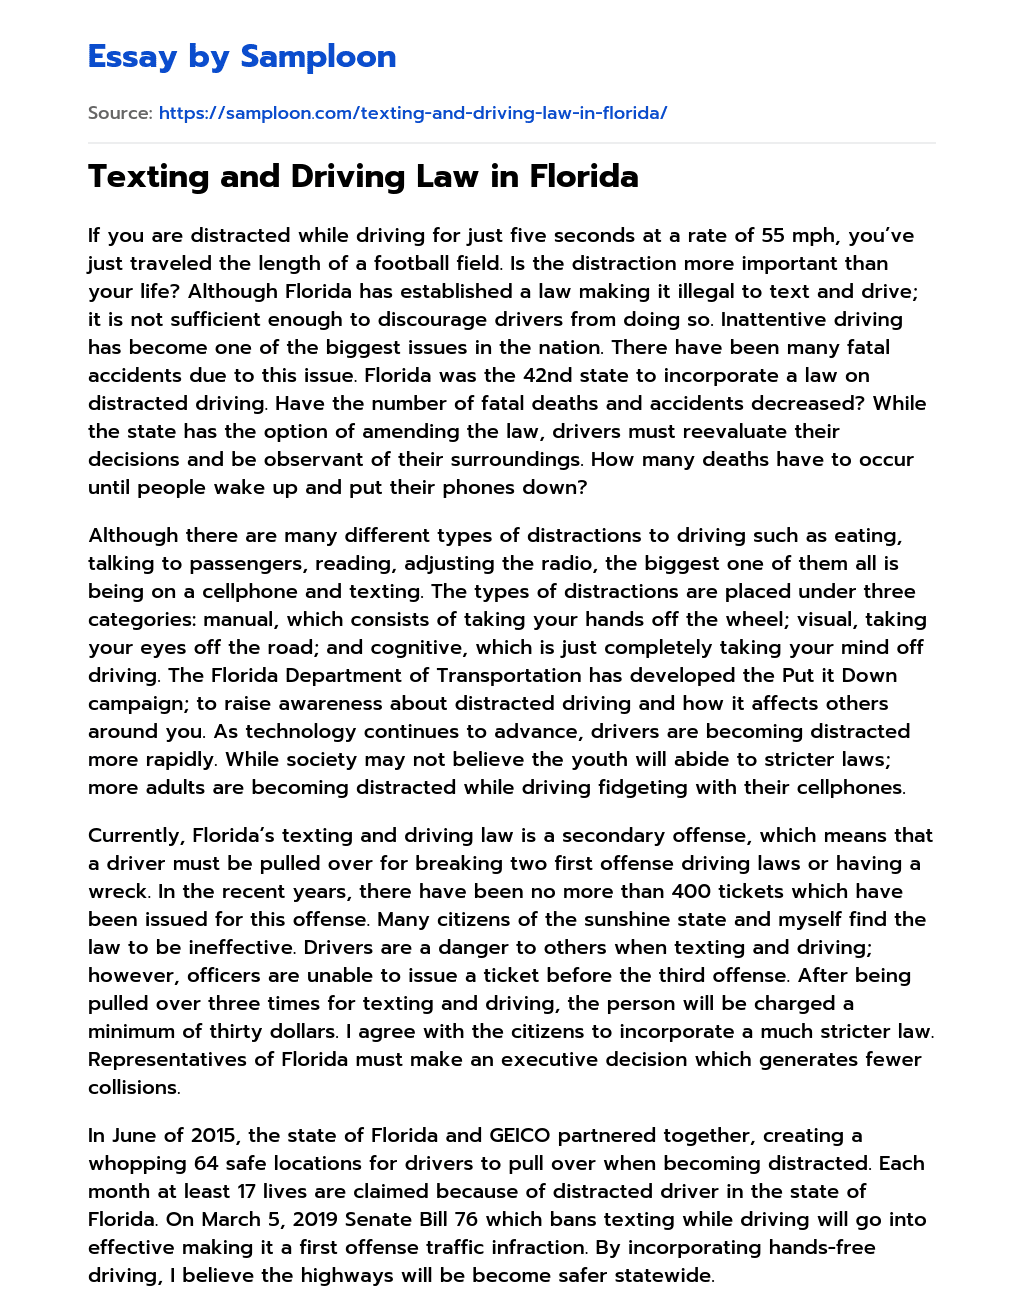 Texting and Driving Law in Florida essay